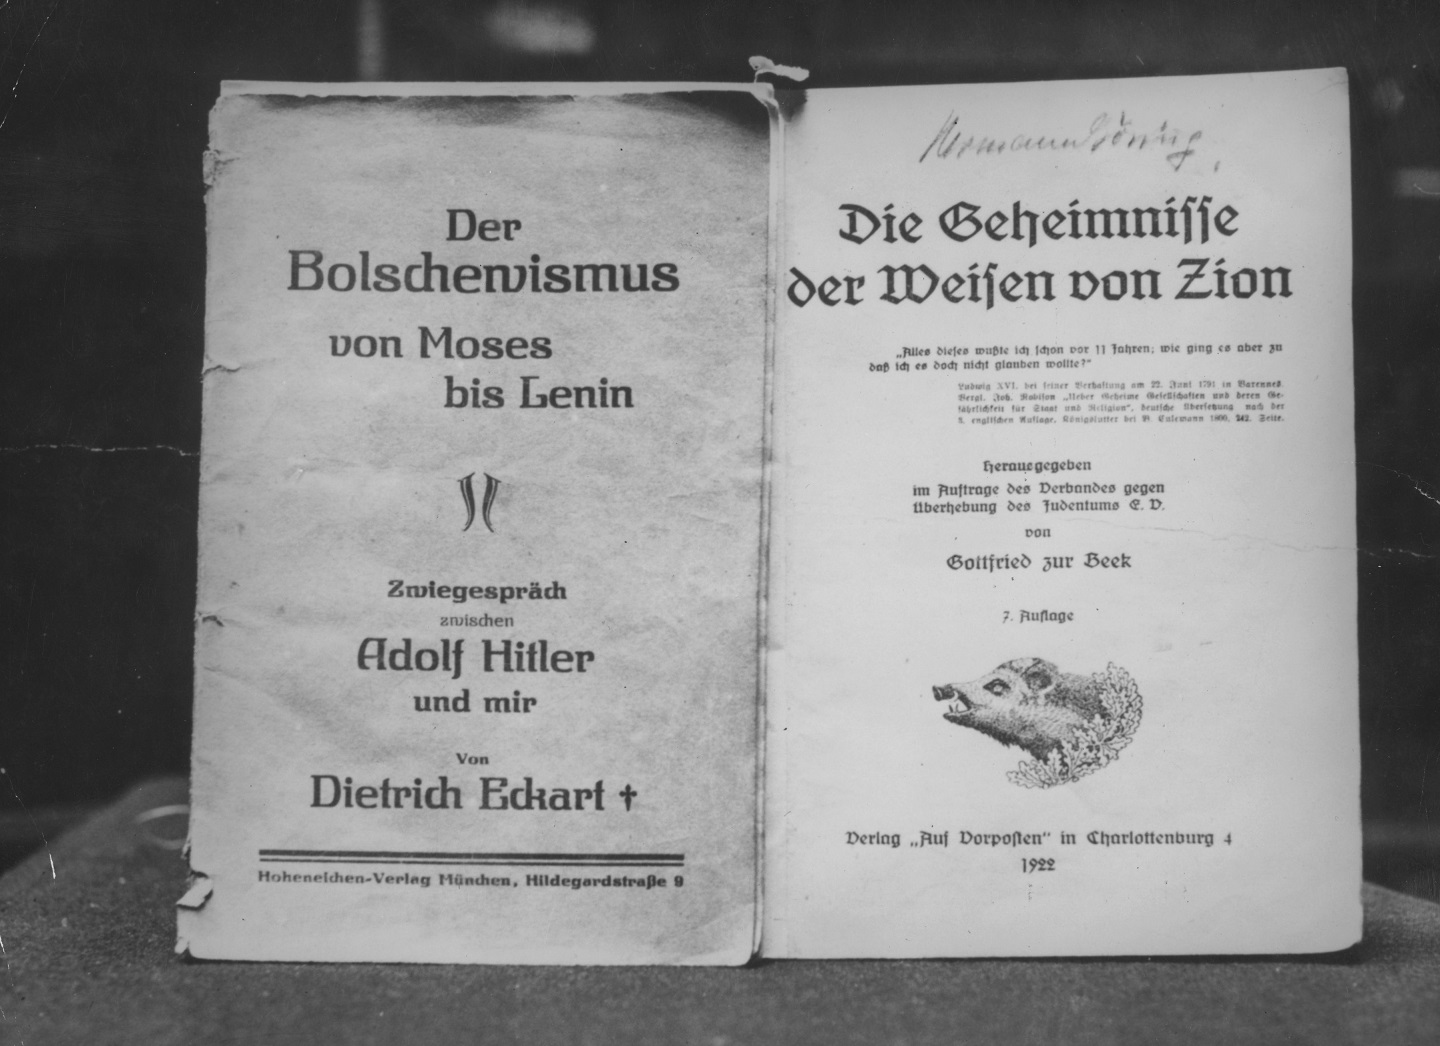 A photograph of the The title pages of 'The Protocols of the Elders of Zion', a Nazi anti-Semitic text.